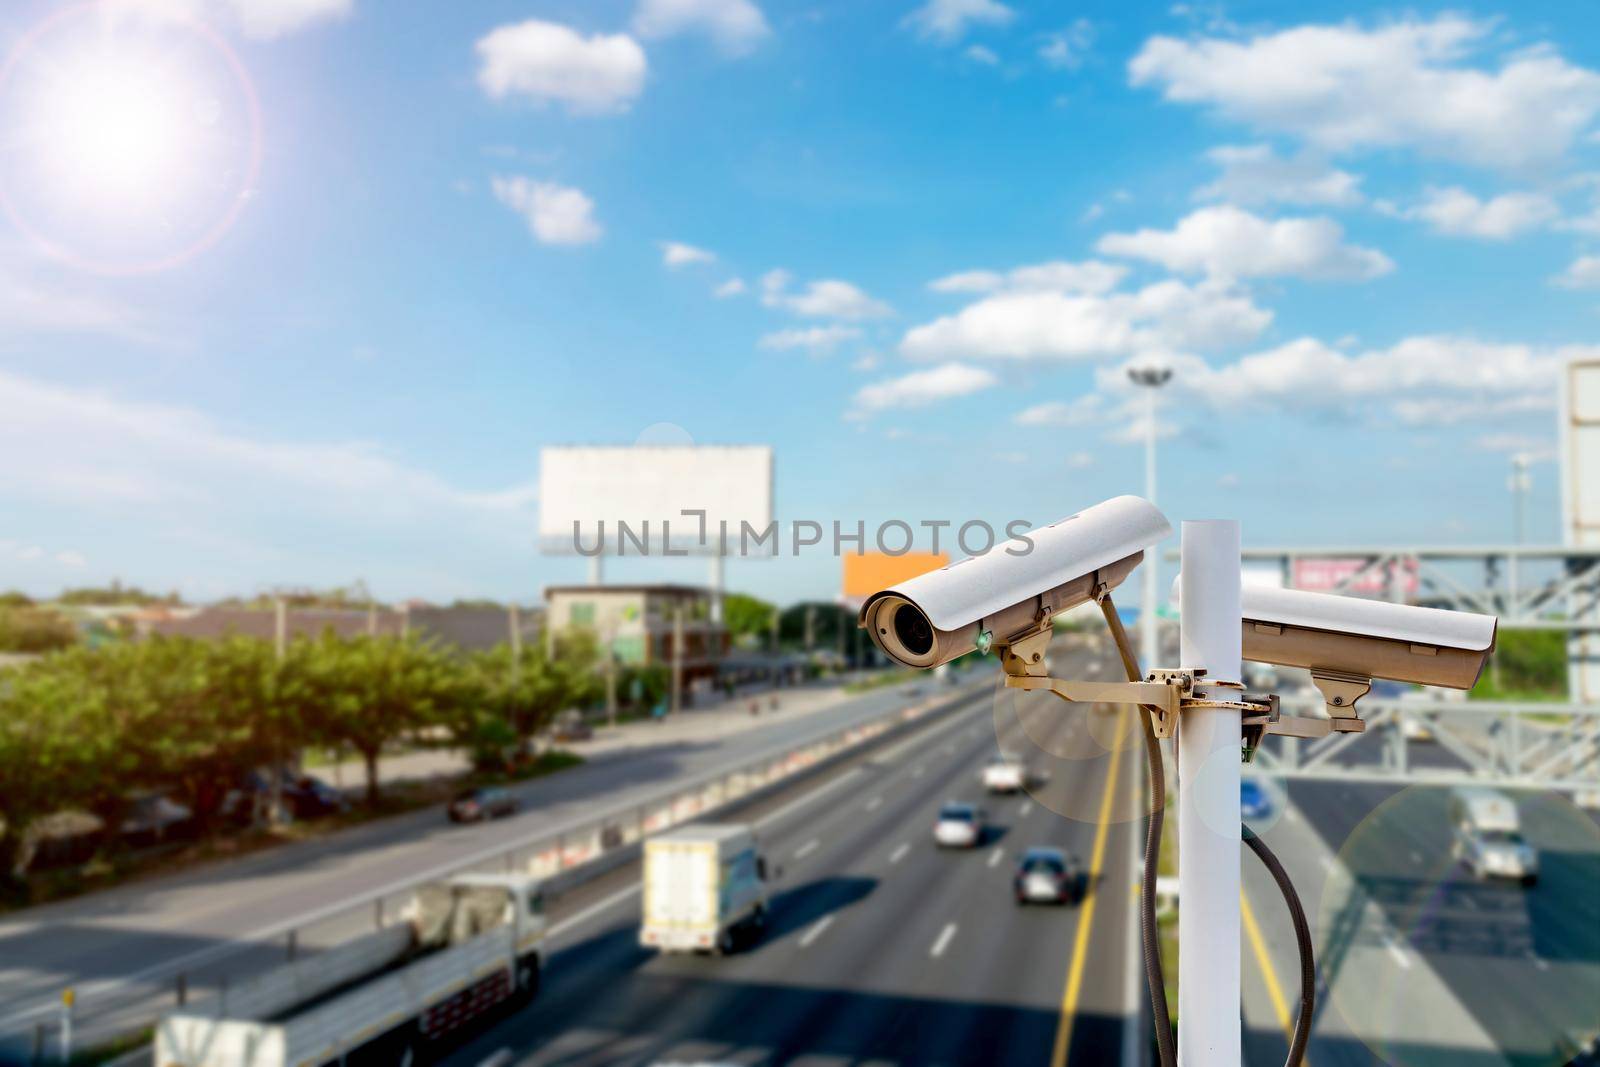 CCTV cameras on the overpass for recording on the road for safety and traffic violations. by wattanaphob